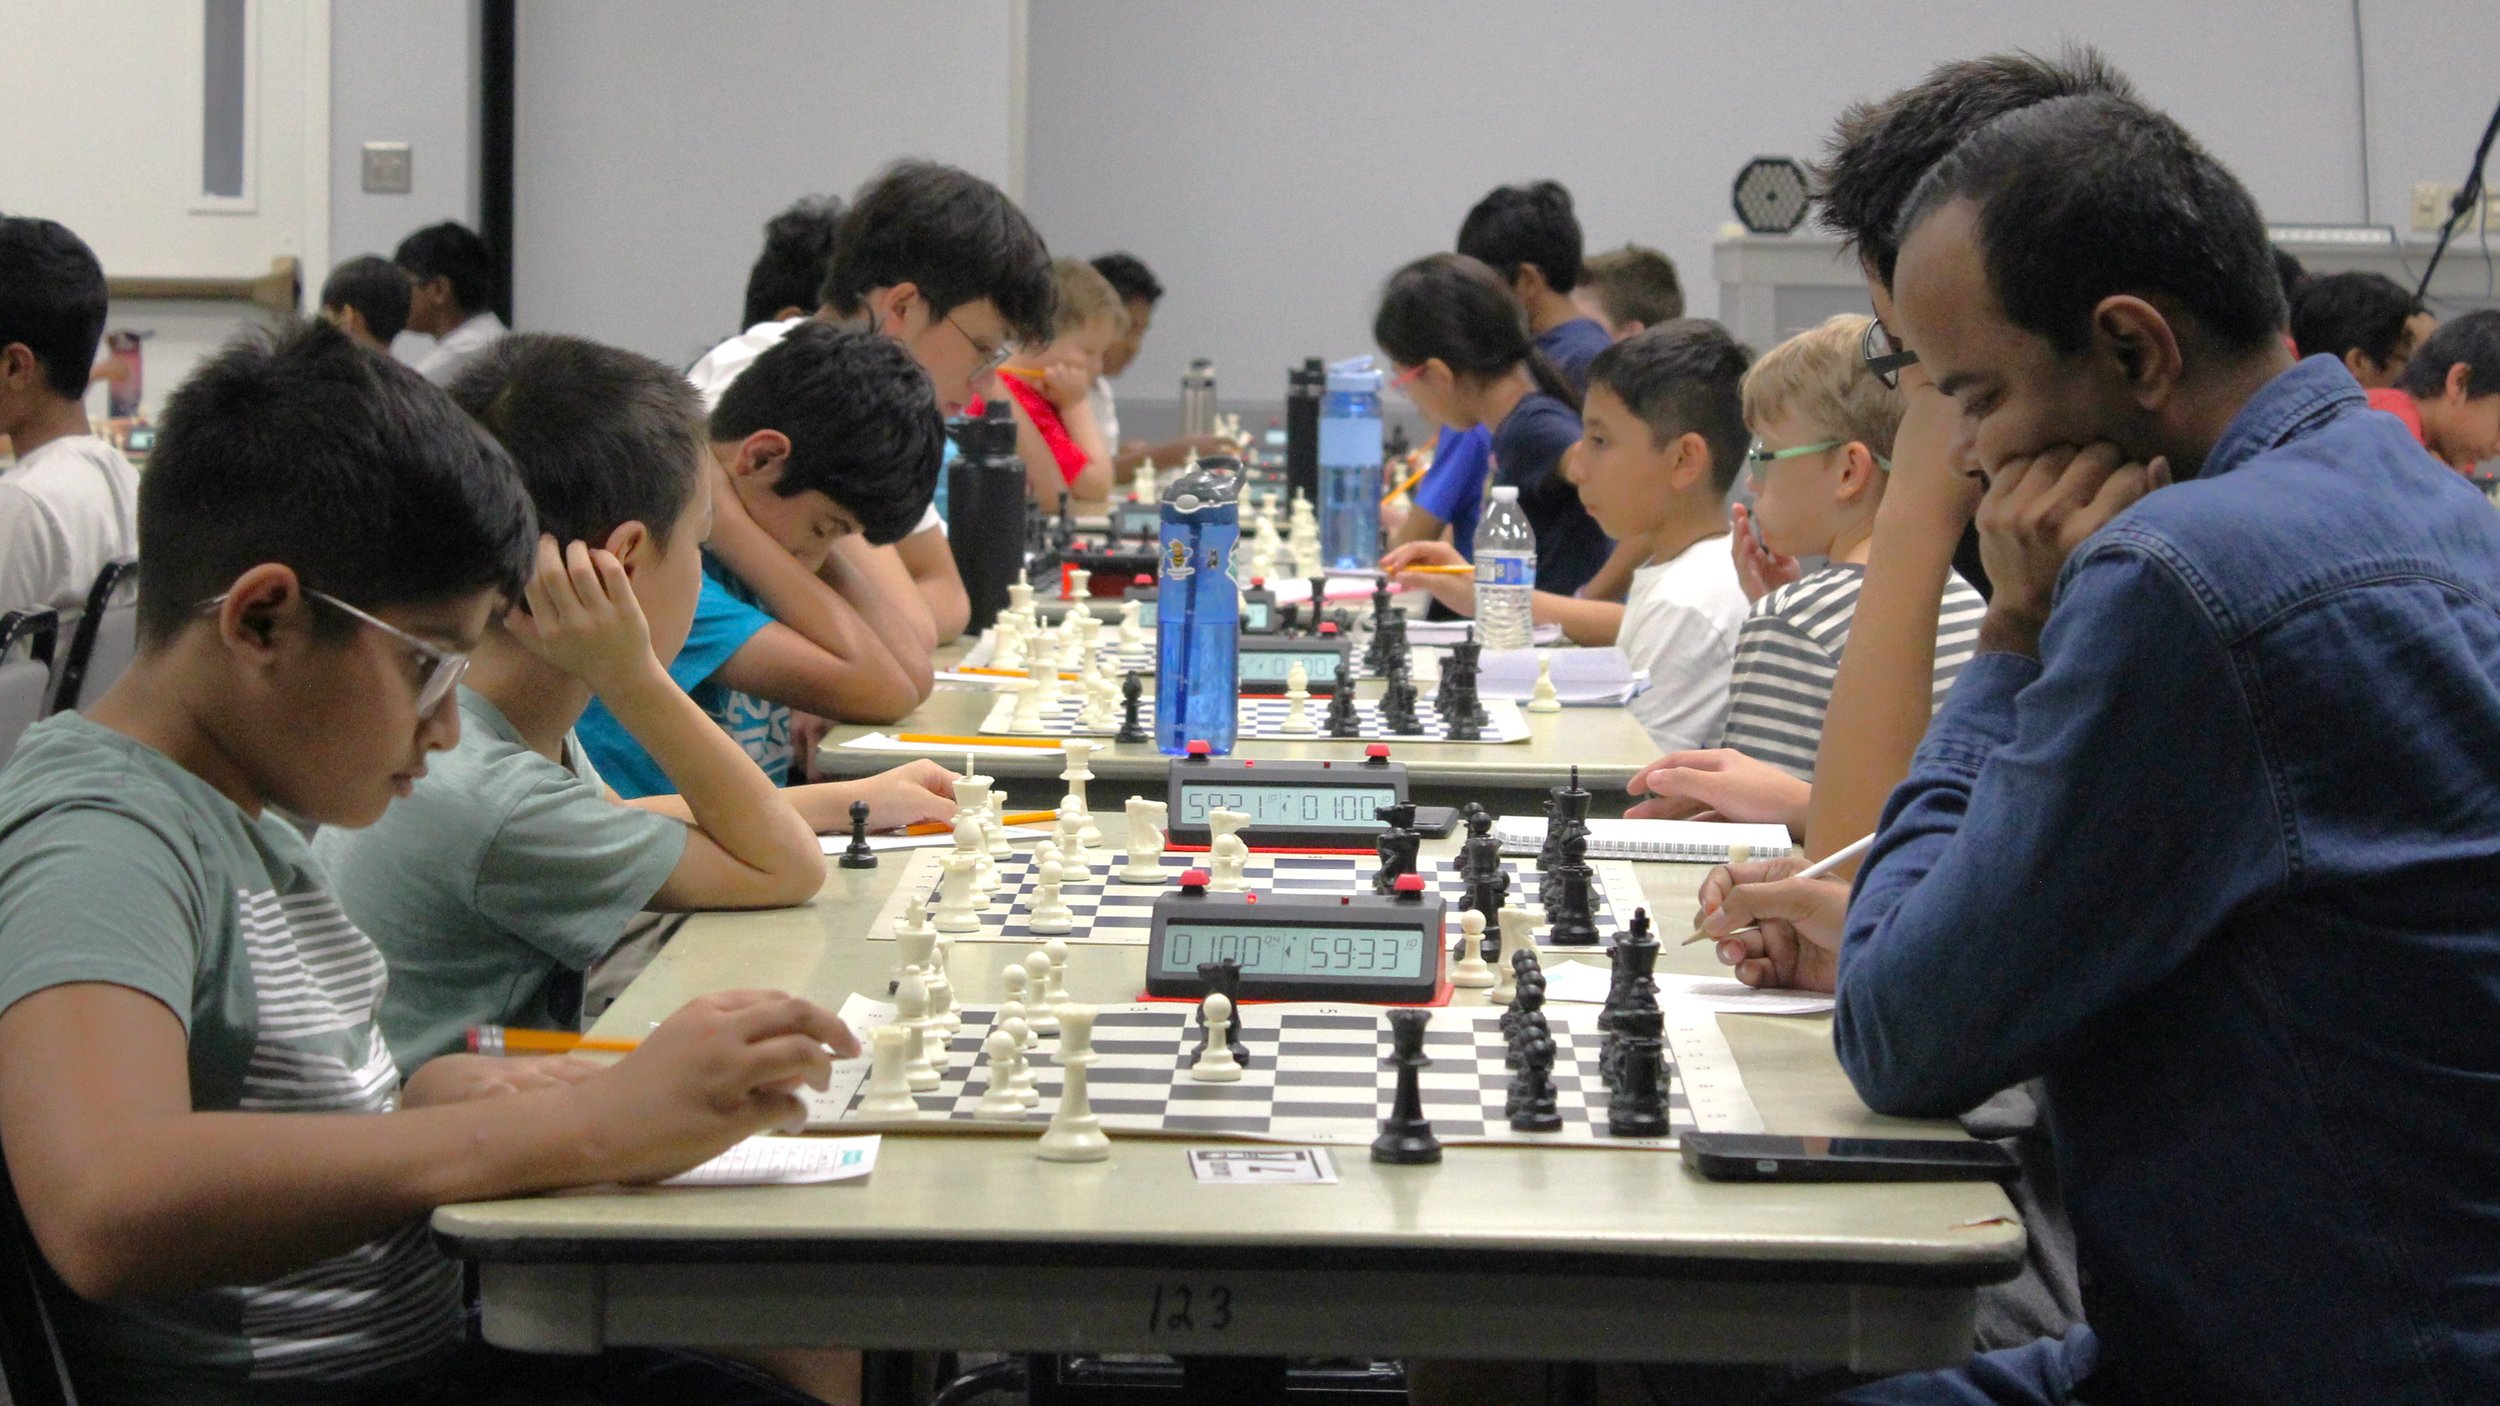 How do you calculate your Tournament Performance Rating? - Chess